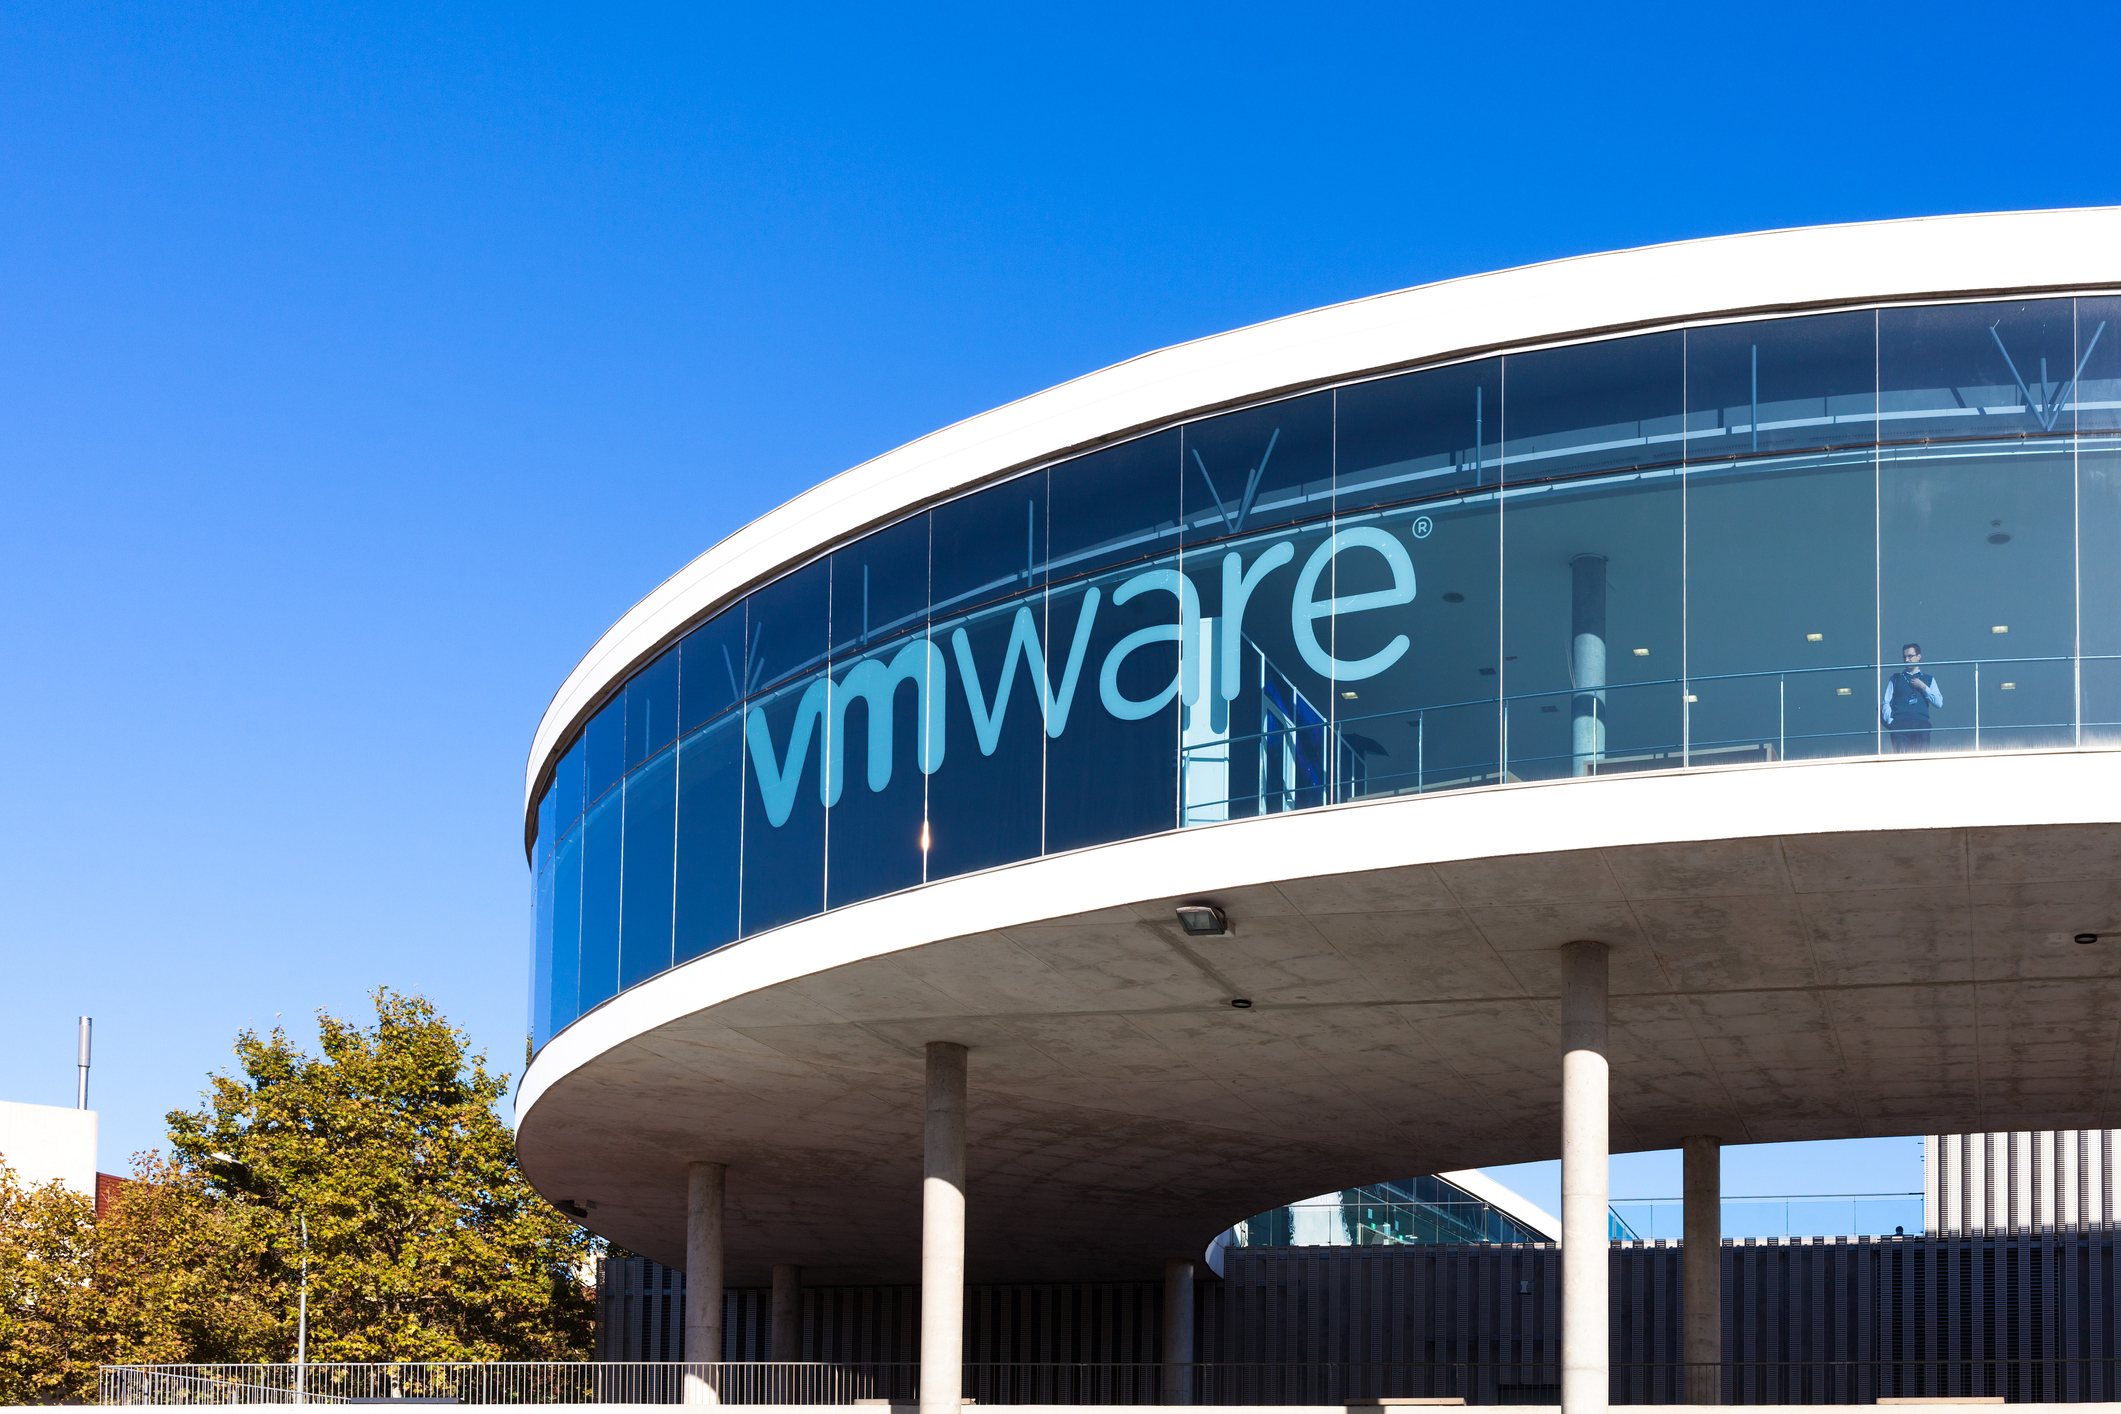 Barcelona, Spain - October 13, 2014: View of the exhibition center. News & Training at VMworld exhibition of VMWARE in Barcelona, Spain.